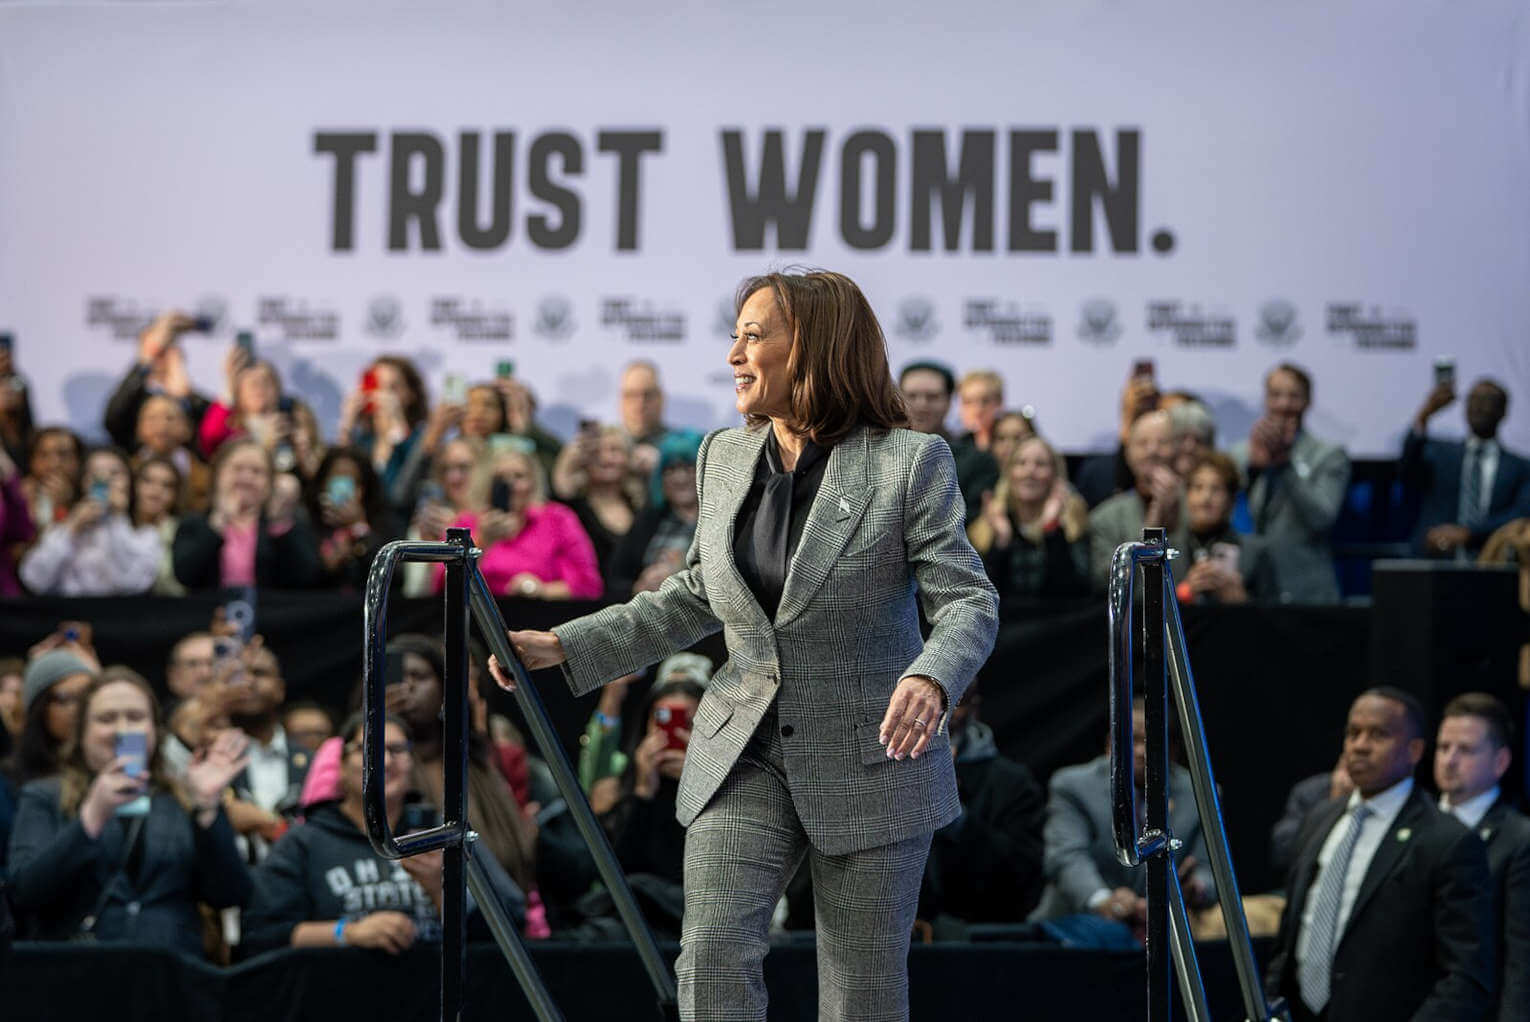 6 Candidates to Join VP Kamala Harris on the 2024 Ticket